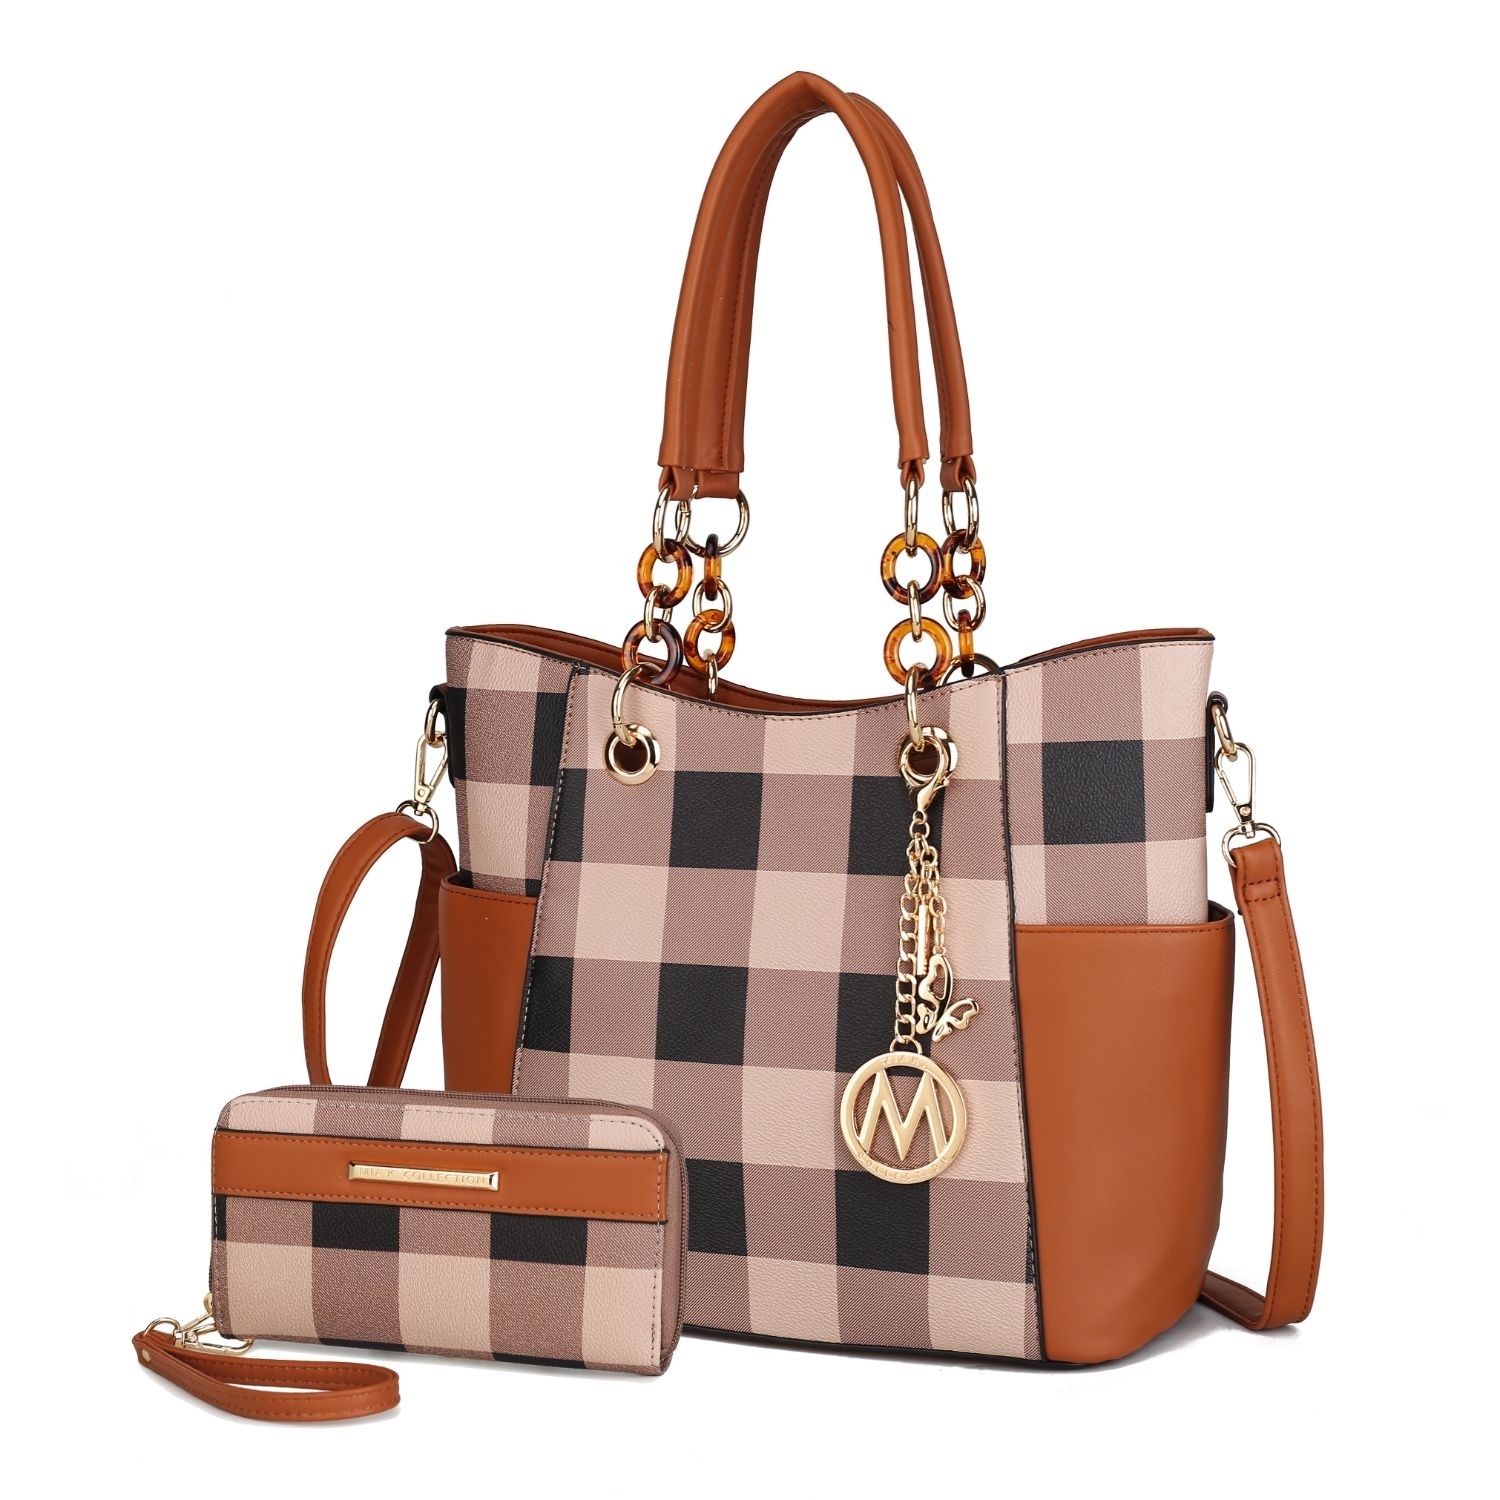 MKF Collection Paloma Shoulder Handbag With Matching Wallet 2 Pieces By Mia K - Cognac Brown